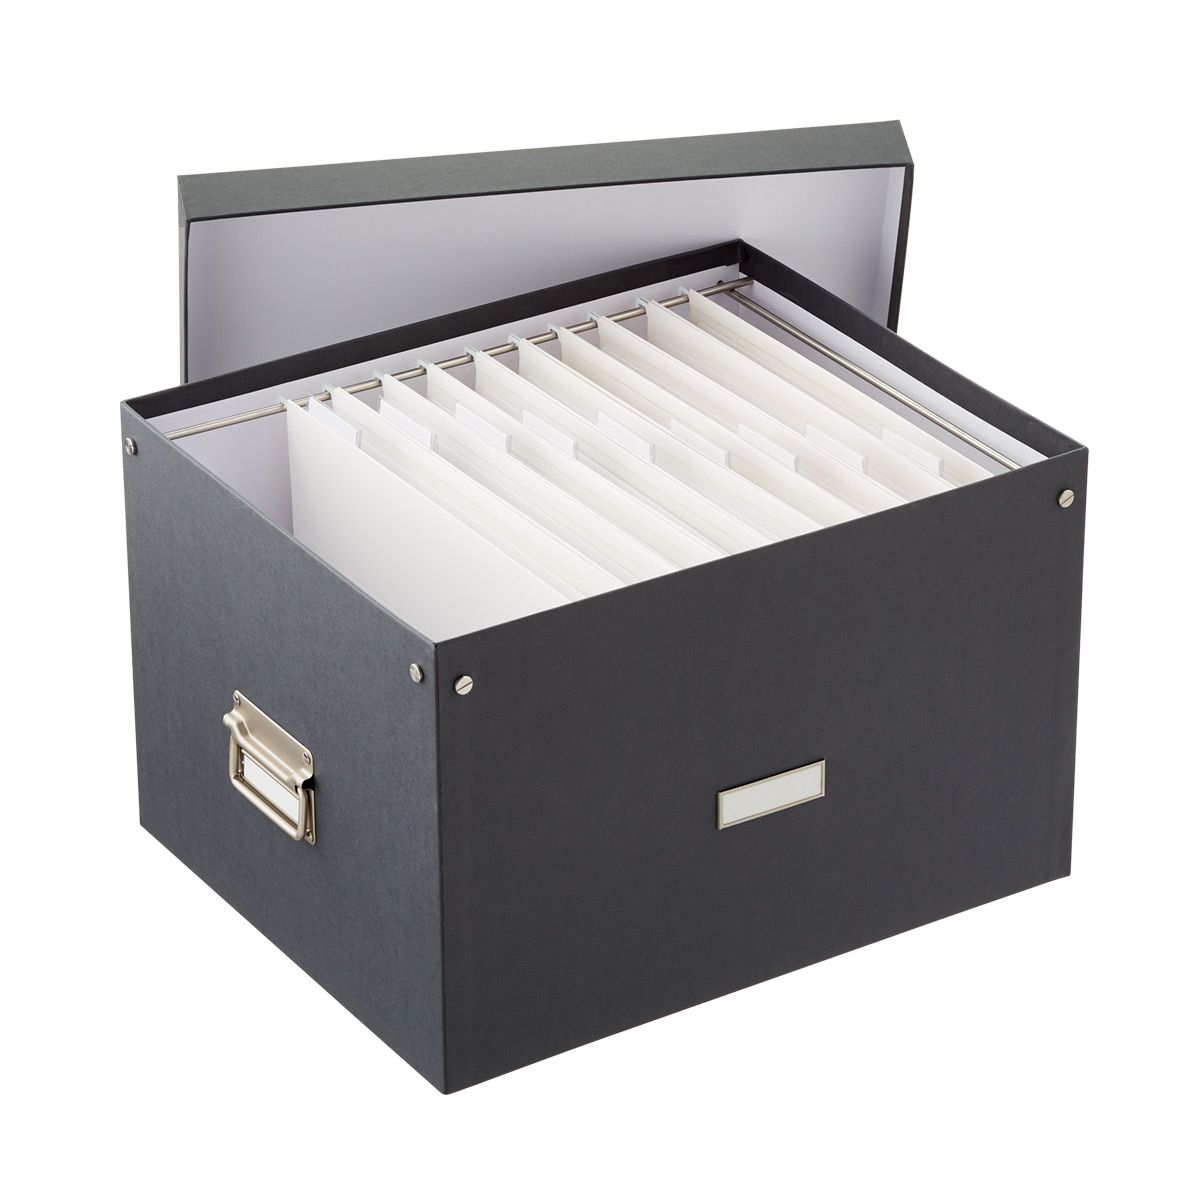 Letter/Legal File Box | The Container Store